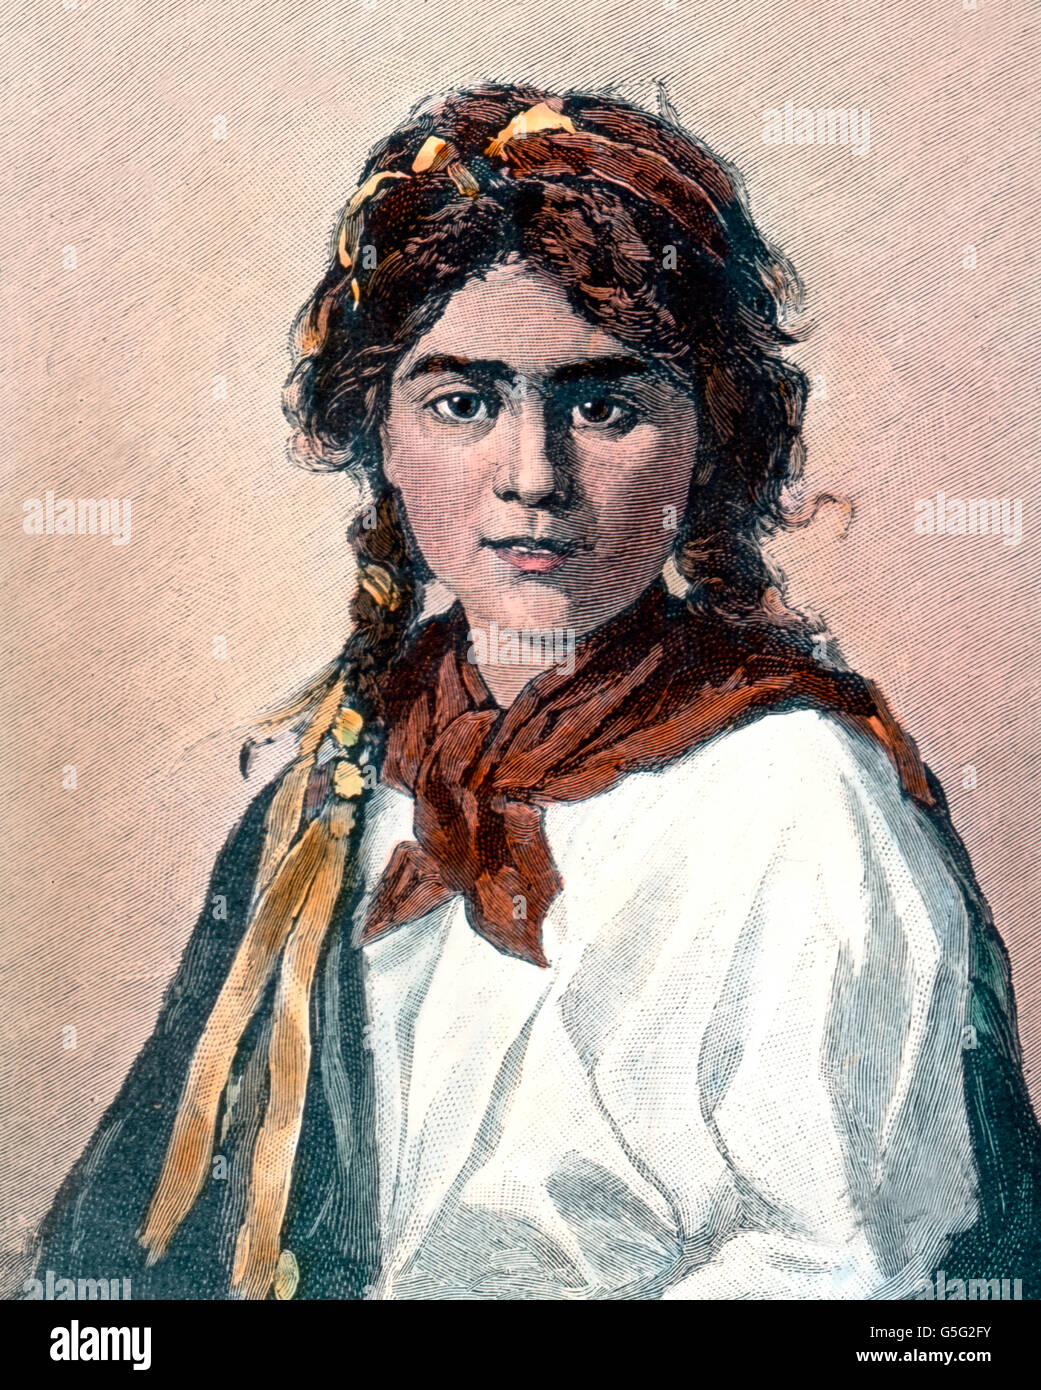 Porträt einer Zigeunerin. Portrait of a Gypsy woman. Romania, Southeastern Europe, Balkan, history, historical, 1910s, 1920s, 20th century, archive, Carl Simon, hand coloured glass slide, woman, illustration, portrait, array, traditional Stock Photo